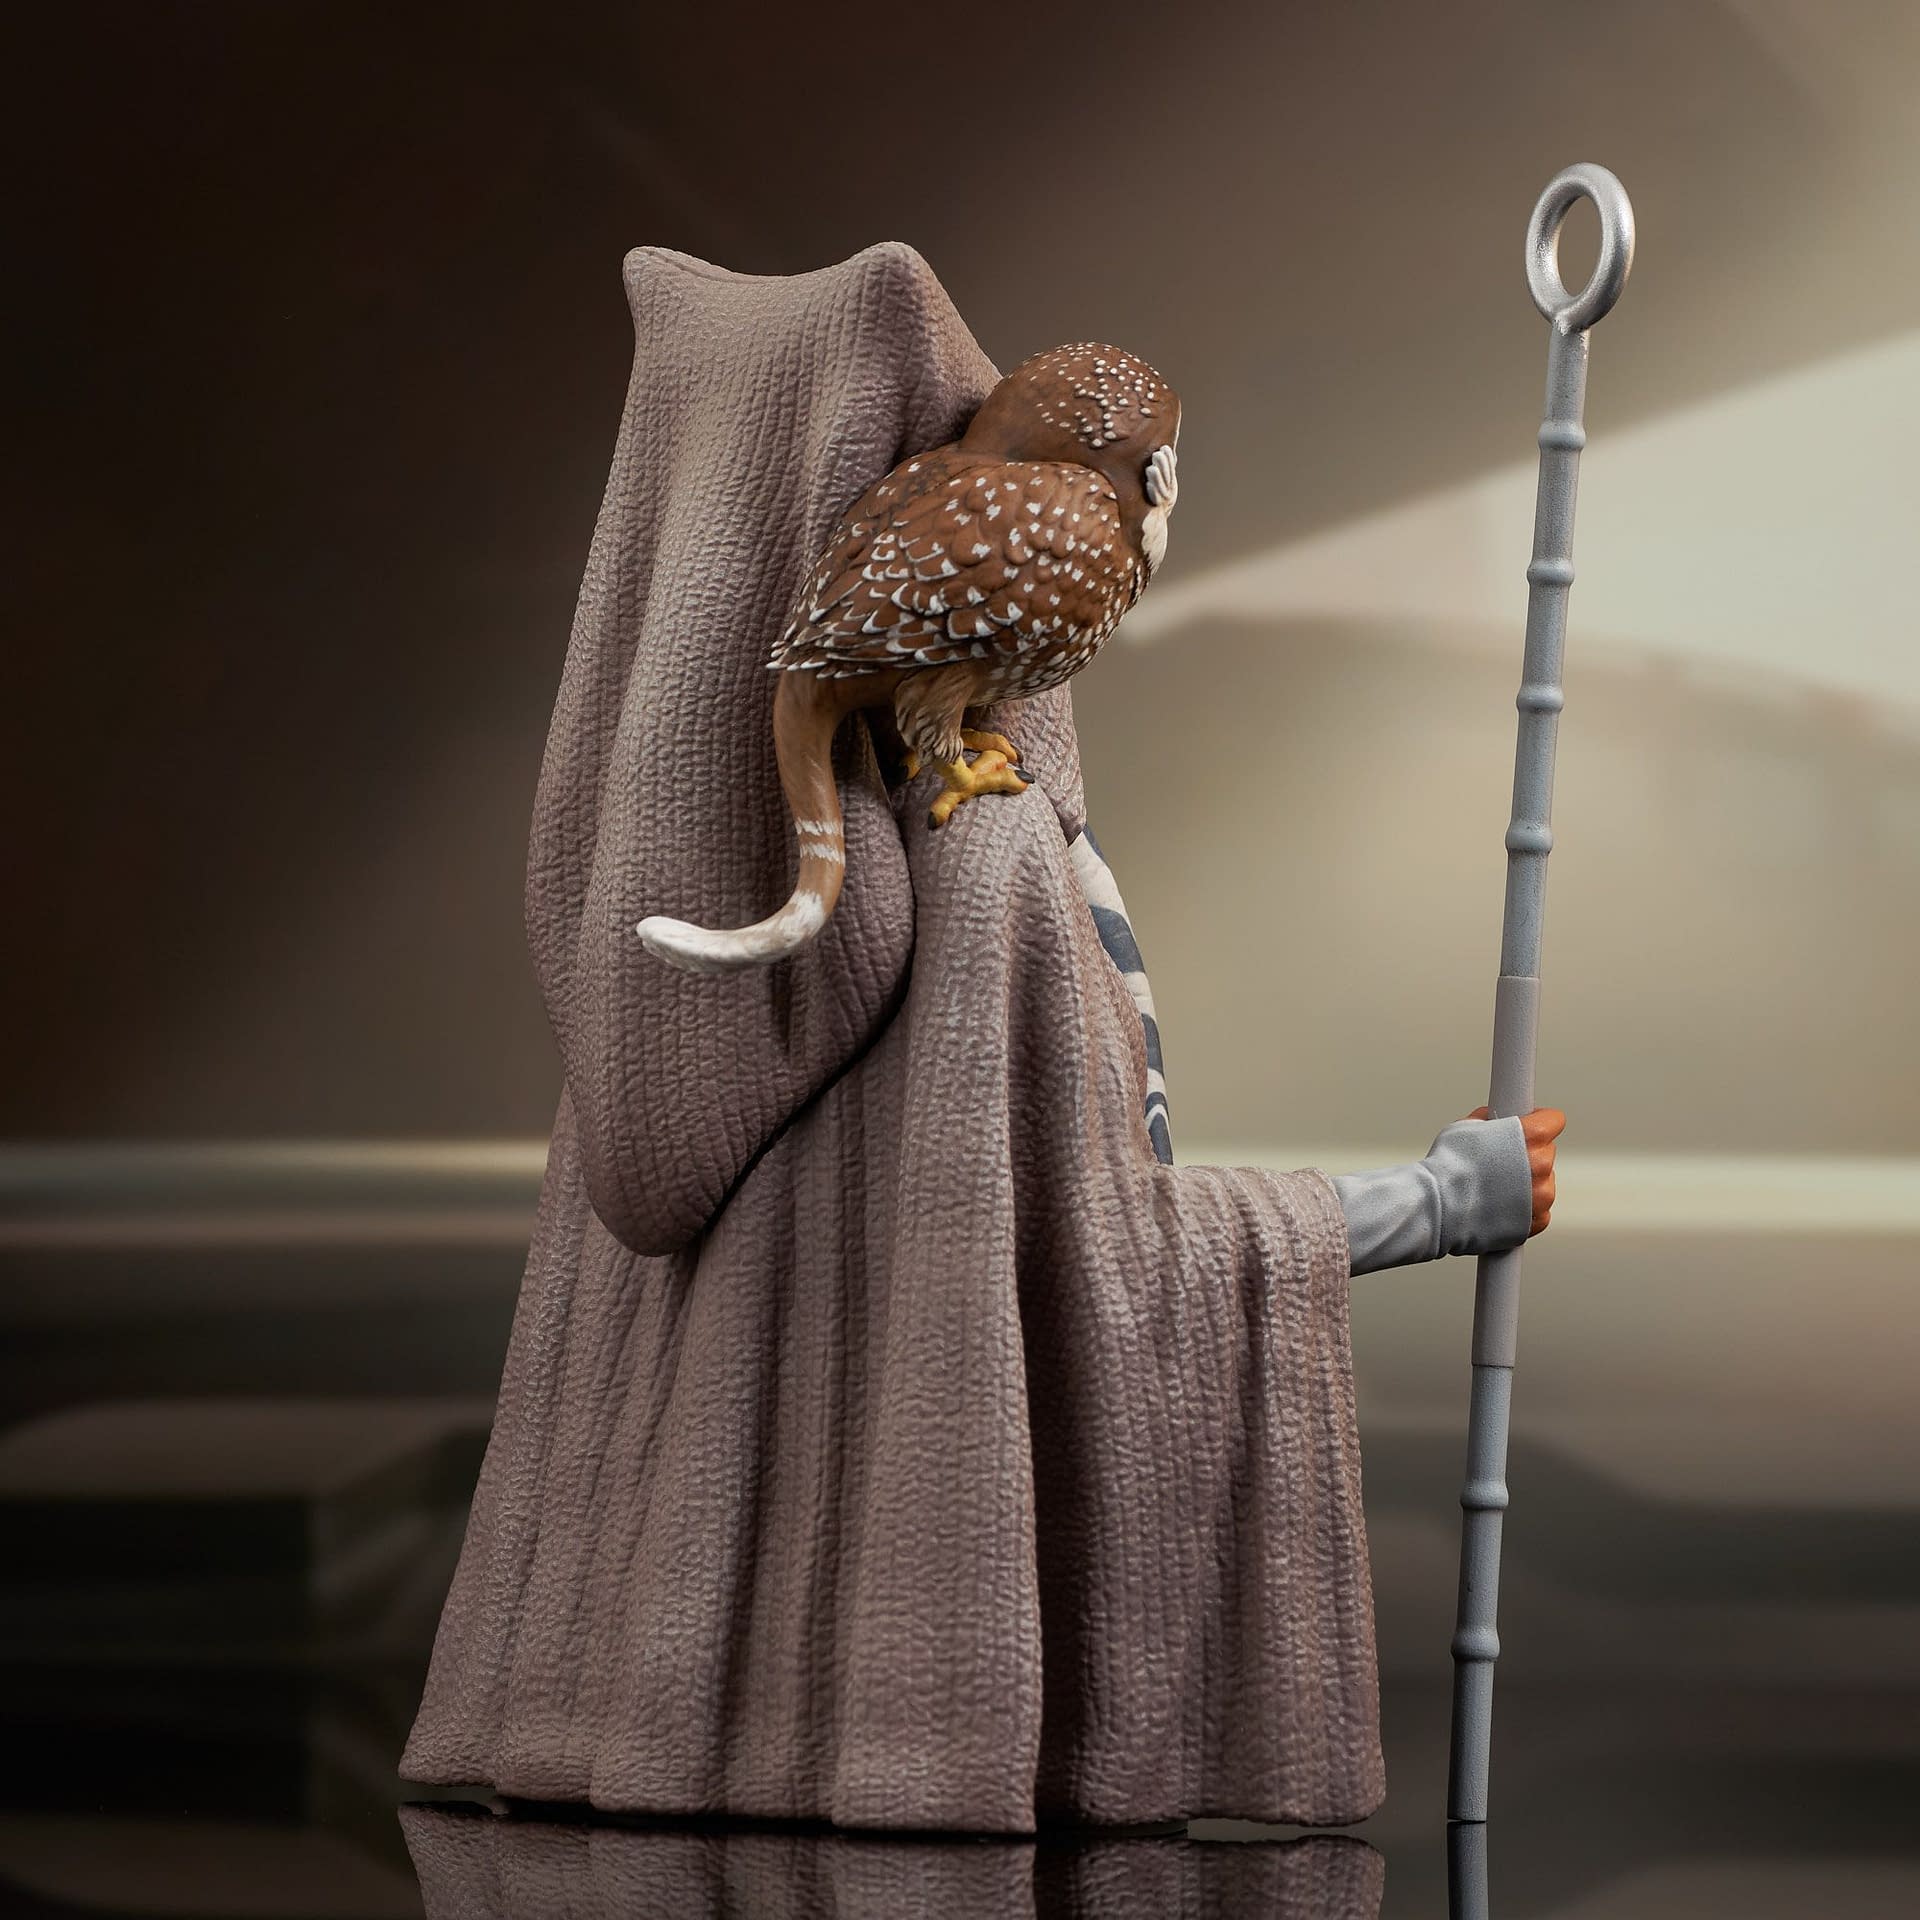 Gentle Giant Debuts New Star Wars Statues with Ahsoka, Leia, and More